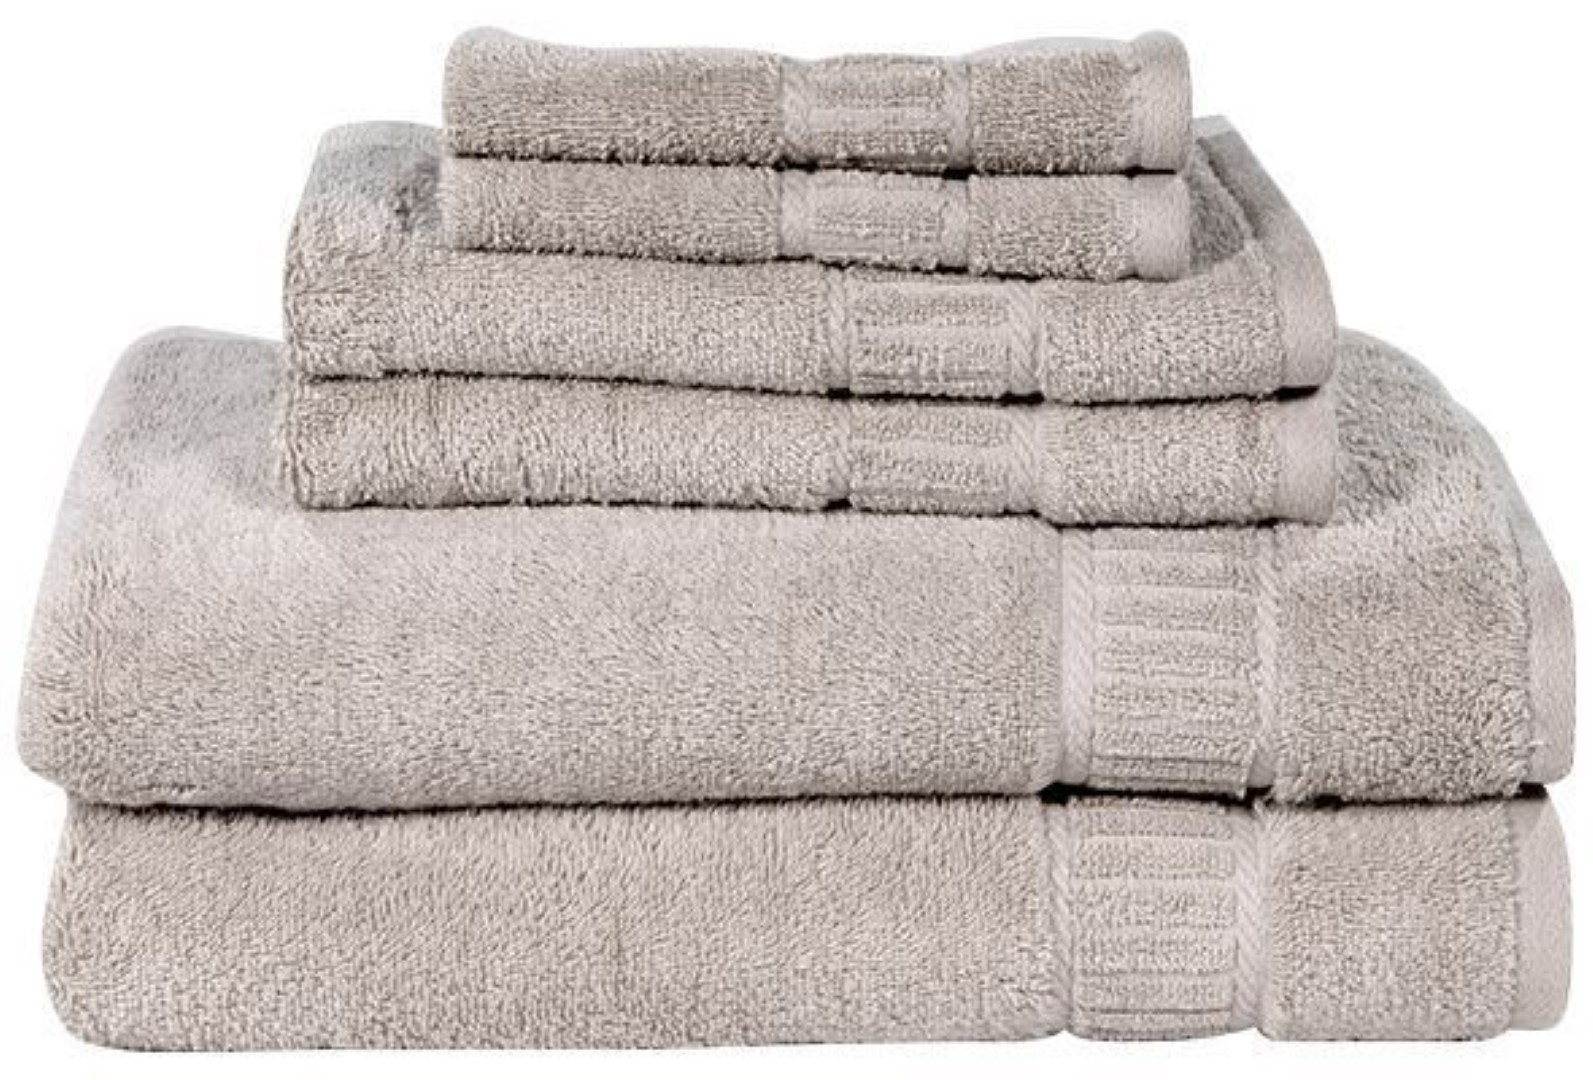 MyPillow Towel 6 Pack - Mineral Gray 